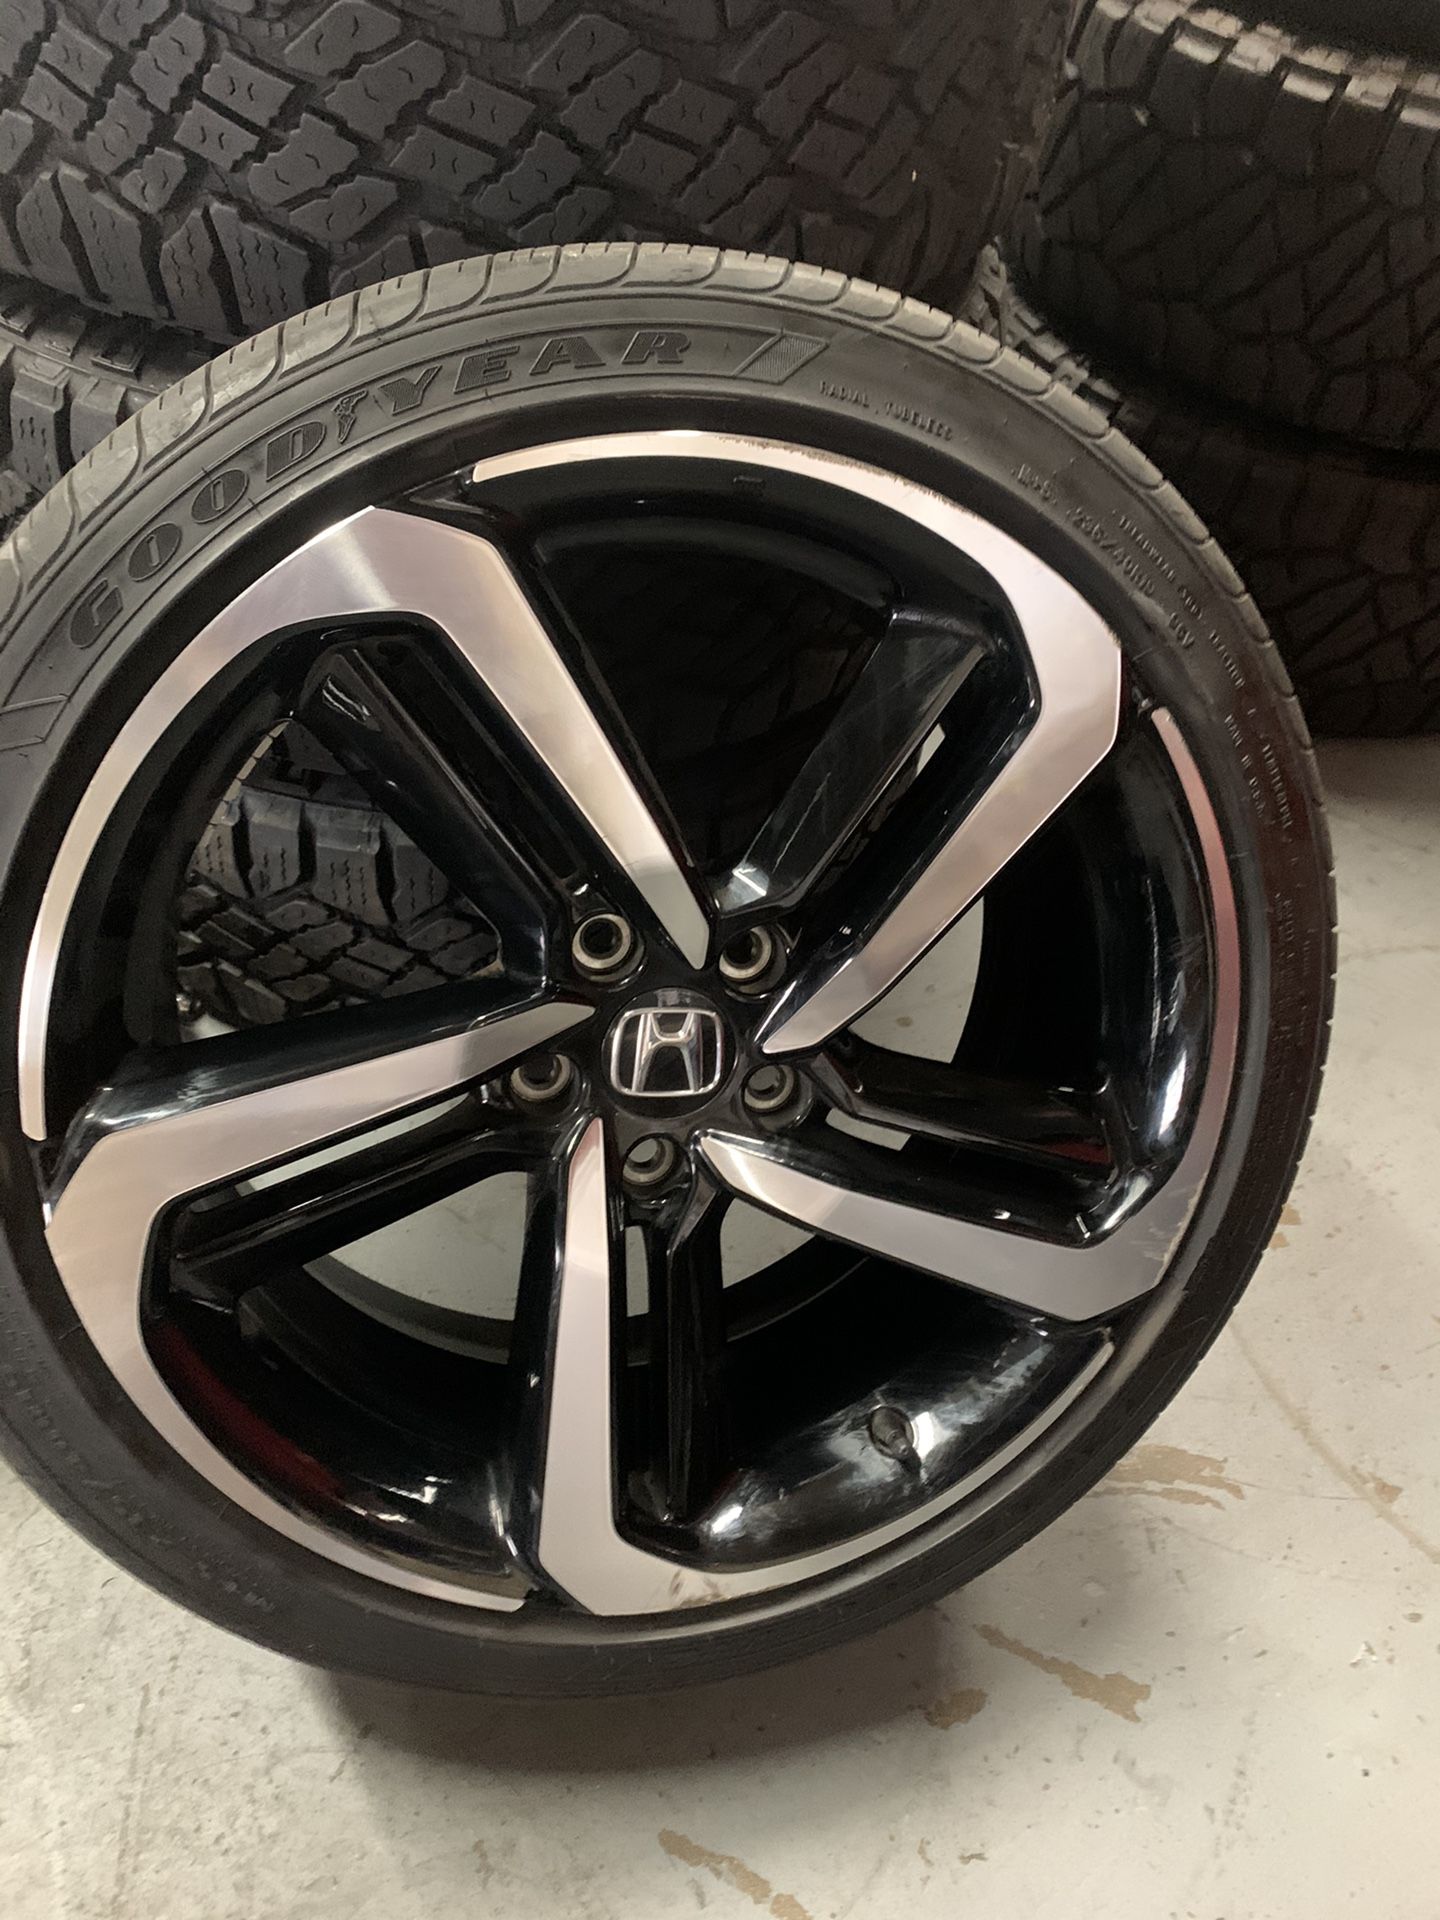 Honda Accord Wheels With Good Condition GoodYear Tires